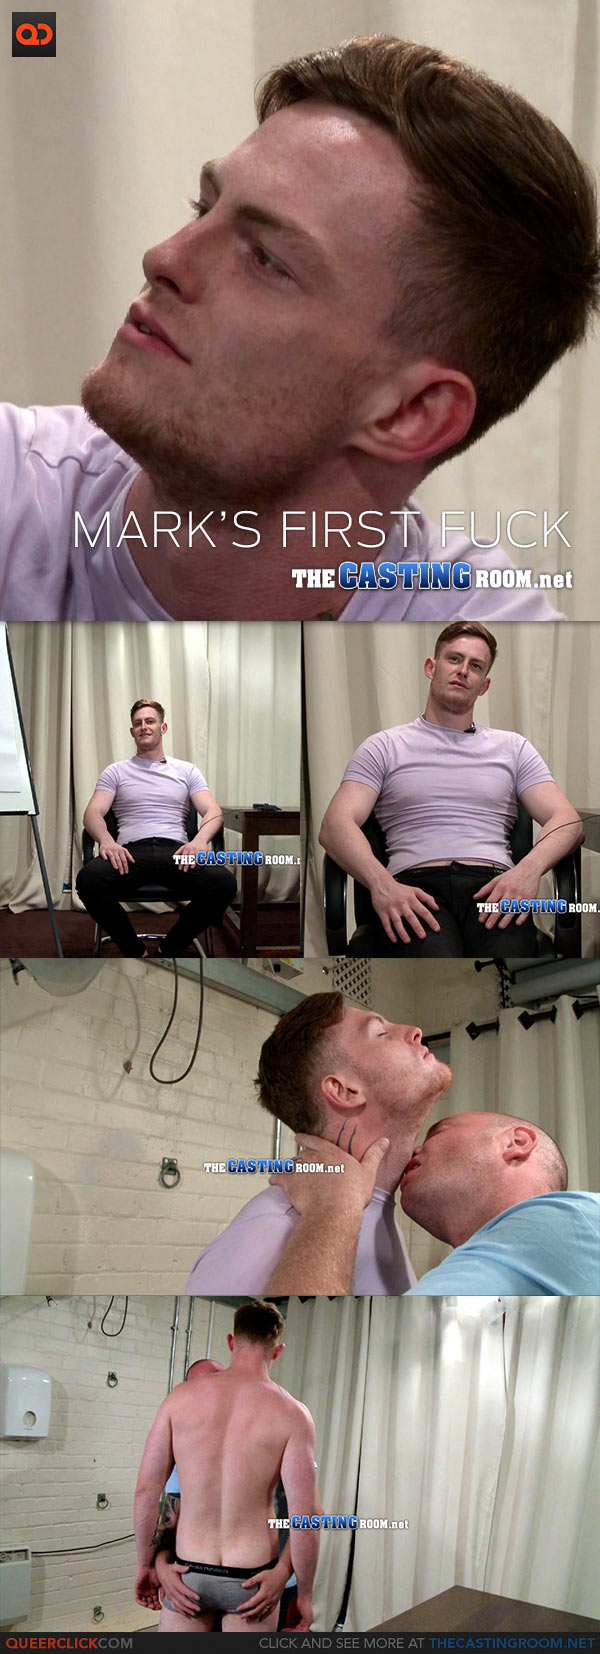 The Casting Room: Red-Headed Mark’s First Fucking